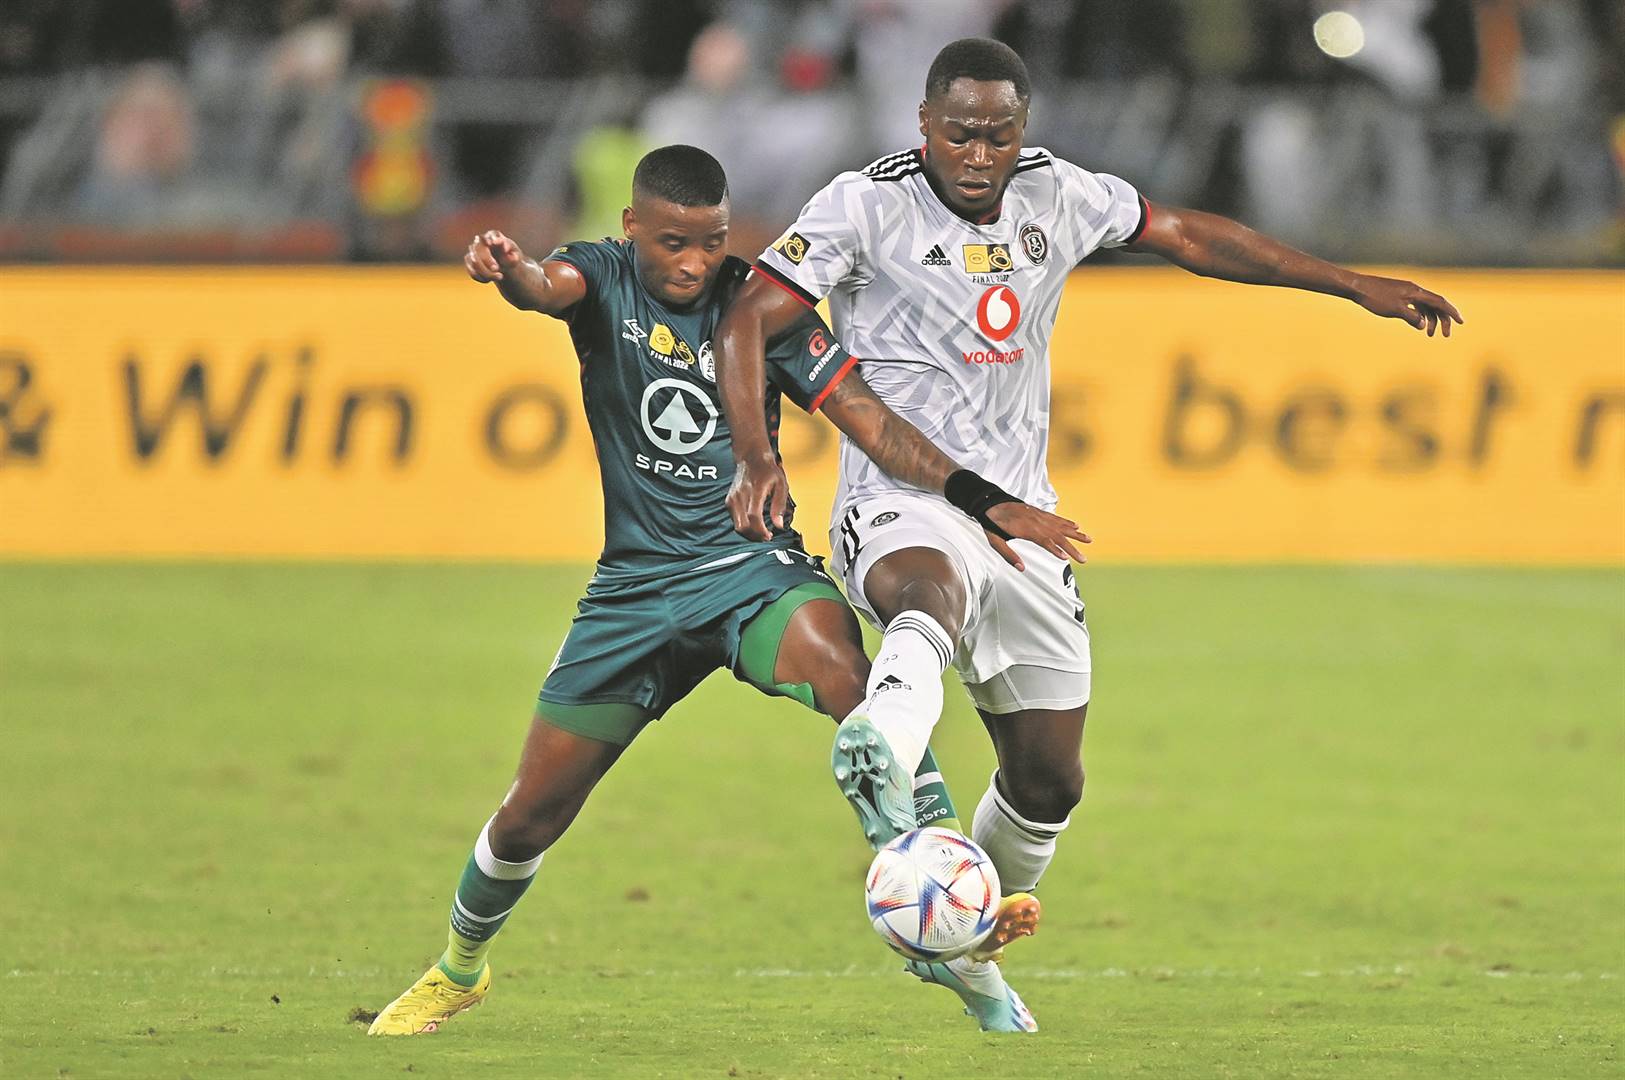 Mbongeni Gumede of AmaZulu in a tussle with Orlando Pirates striker Bienvenu Eva Nga during the MTN8 final at Moses Mabhida Stadium on Saturday. Photo by              BackpagePix